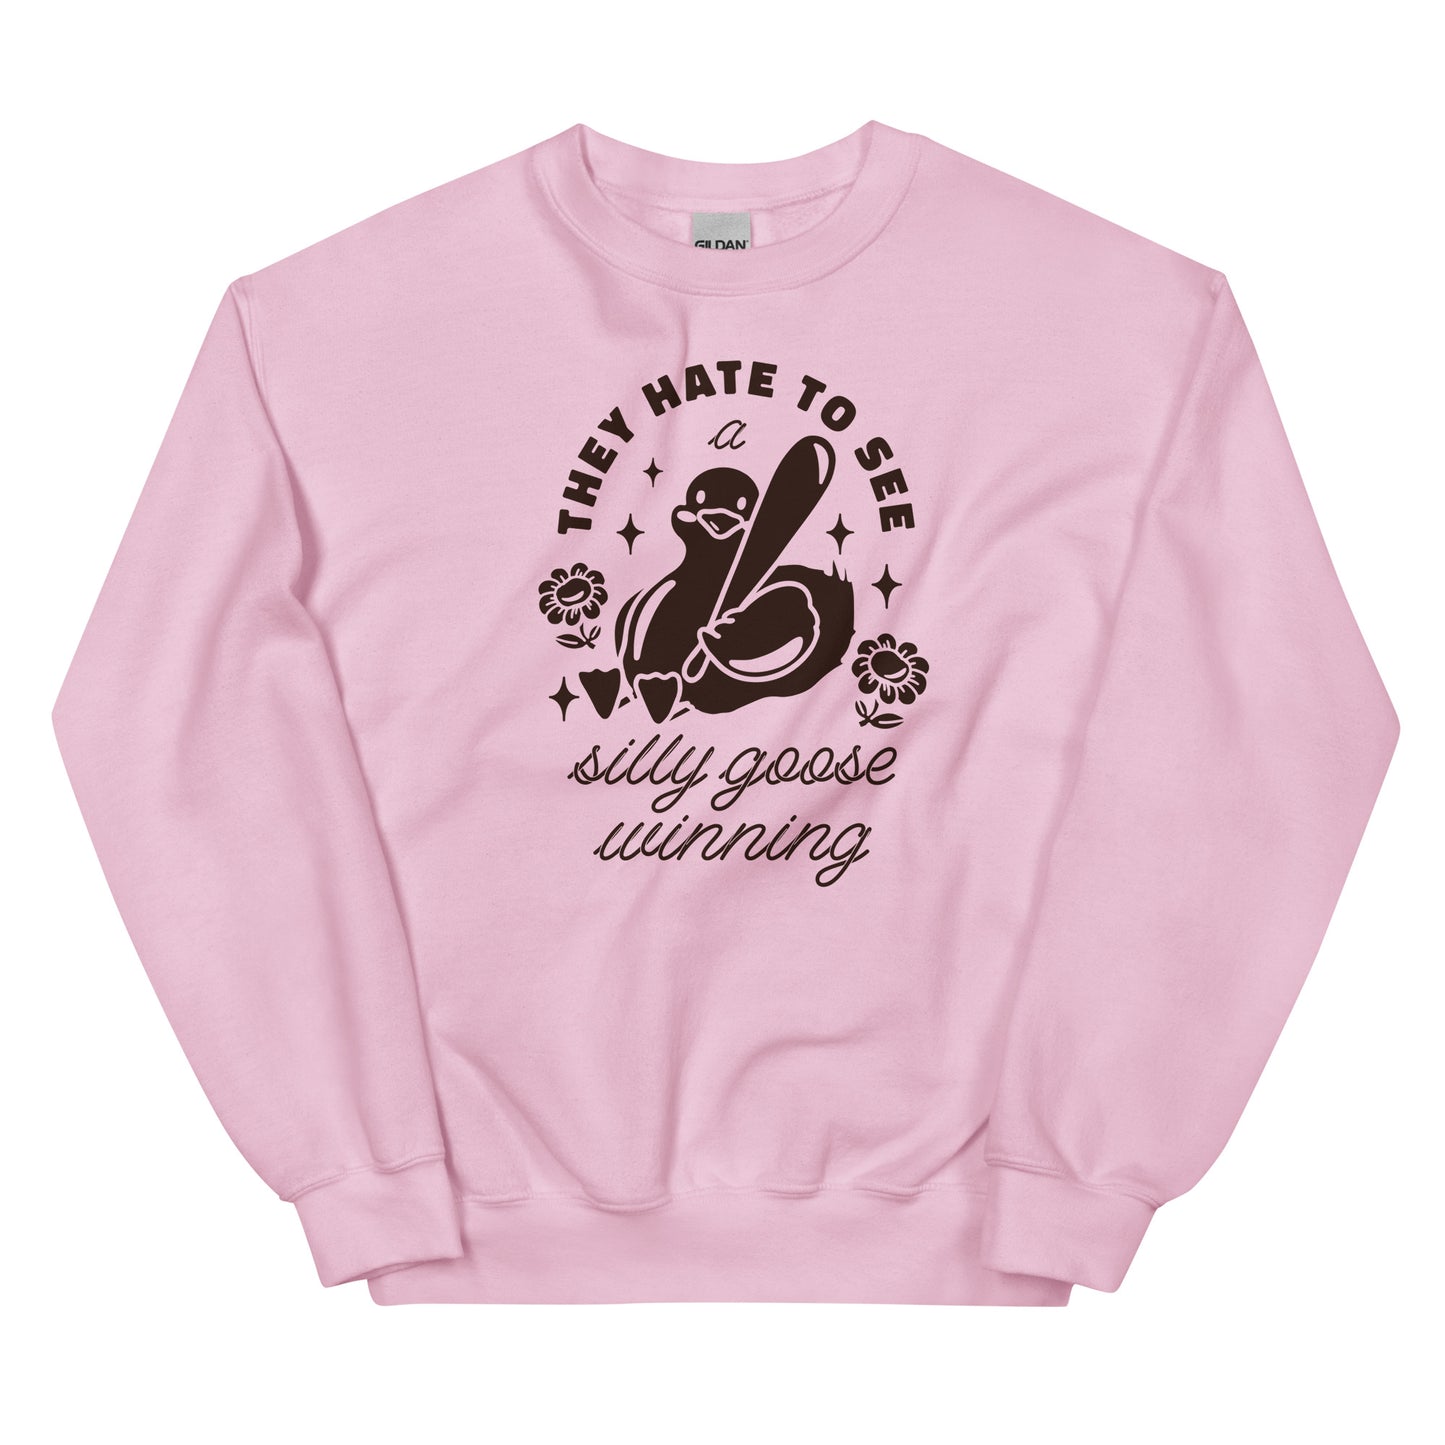 They Hate To See a Silly Goose Winning Unisex Sweatshirt